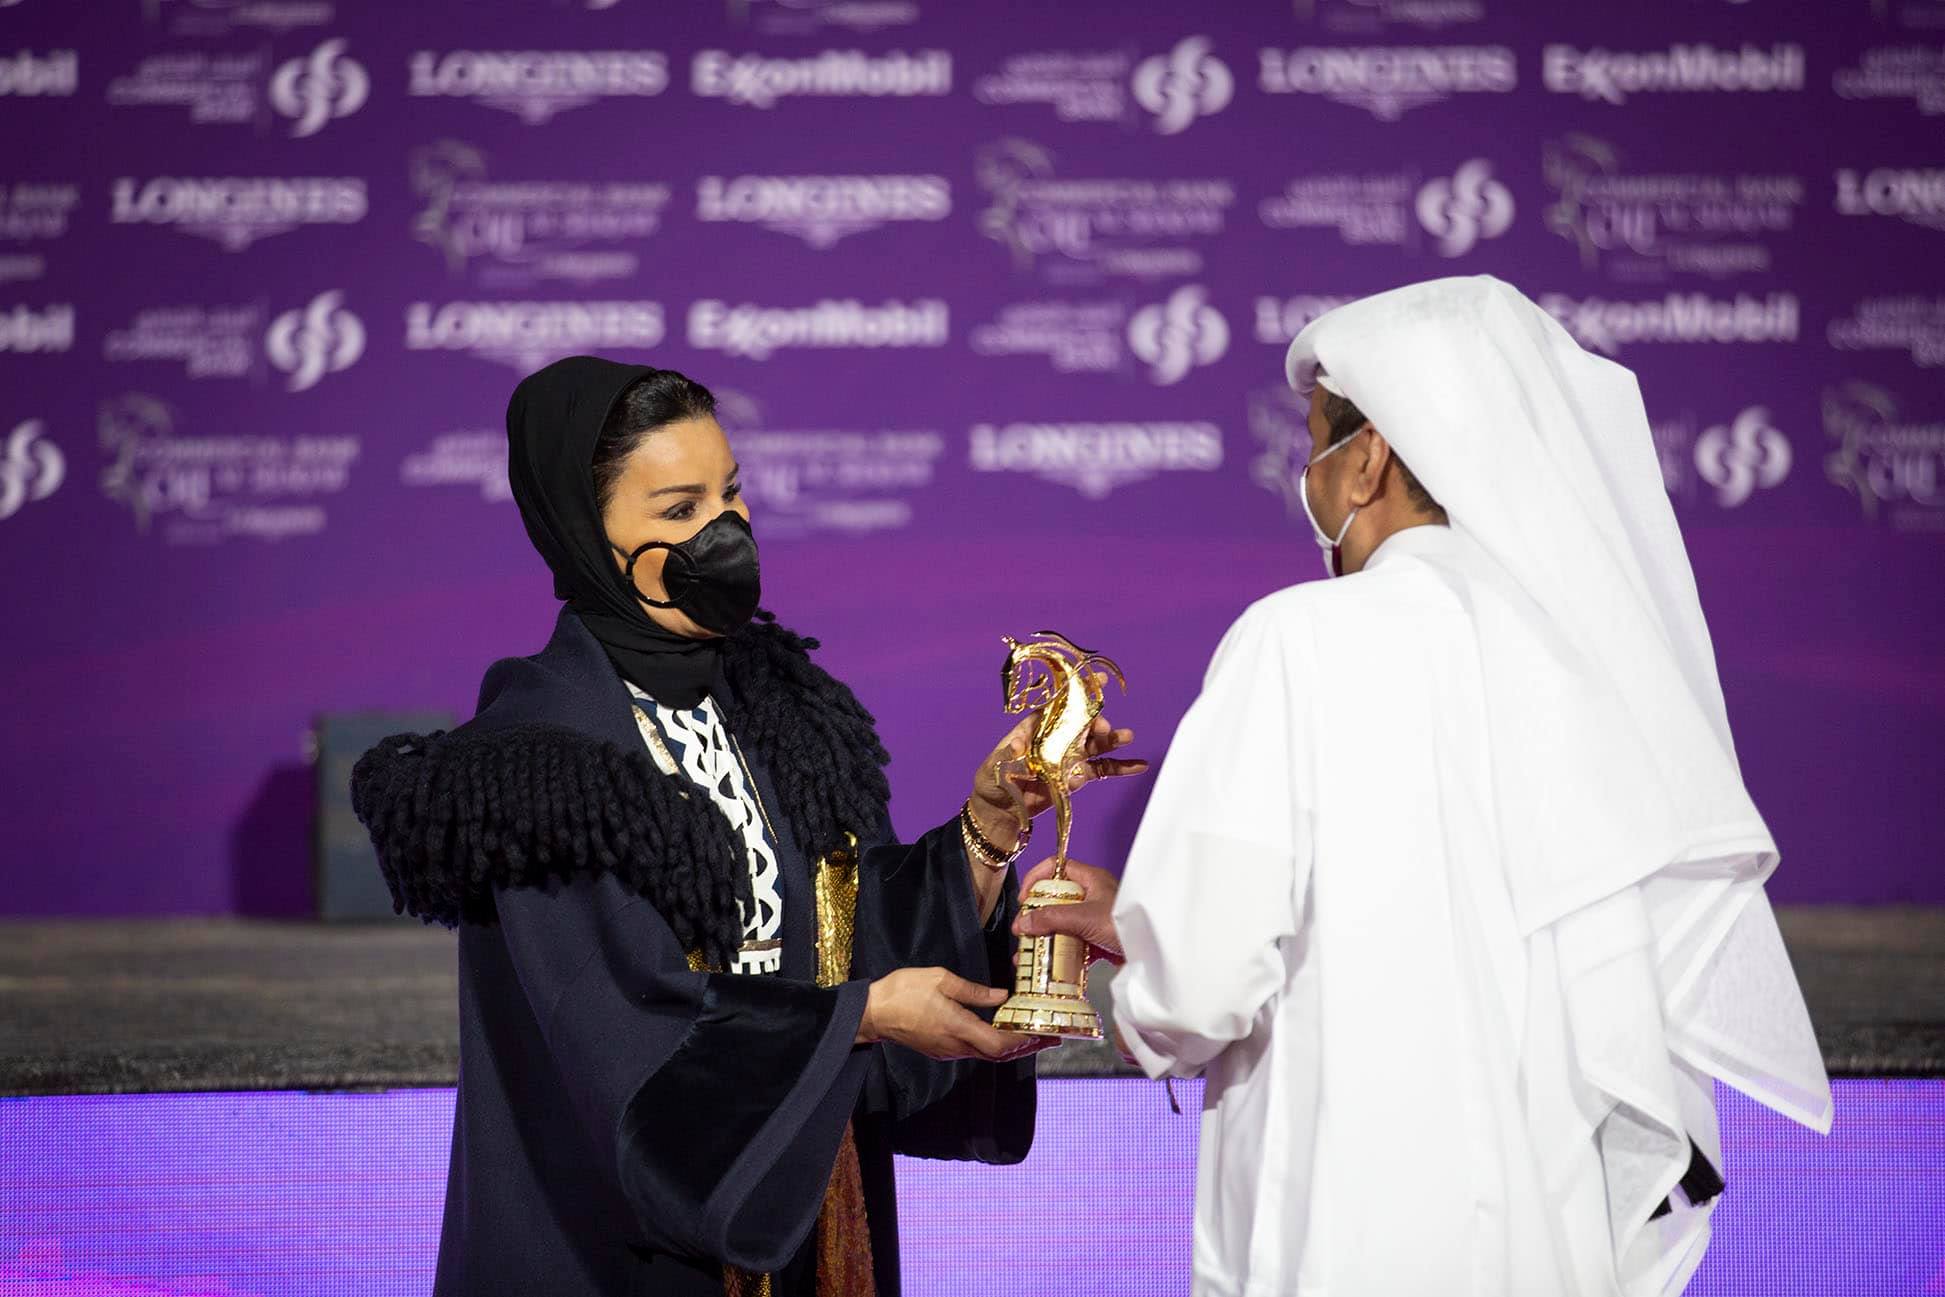 Sheikha Moza Witnesses Conclusion of Commercial Bank CHI Al SHAQAB